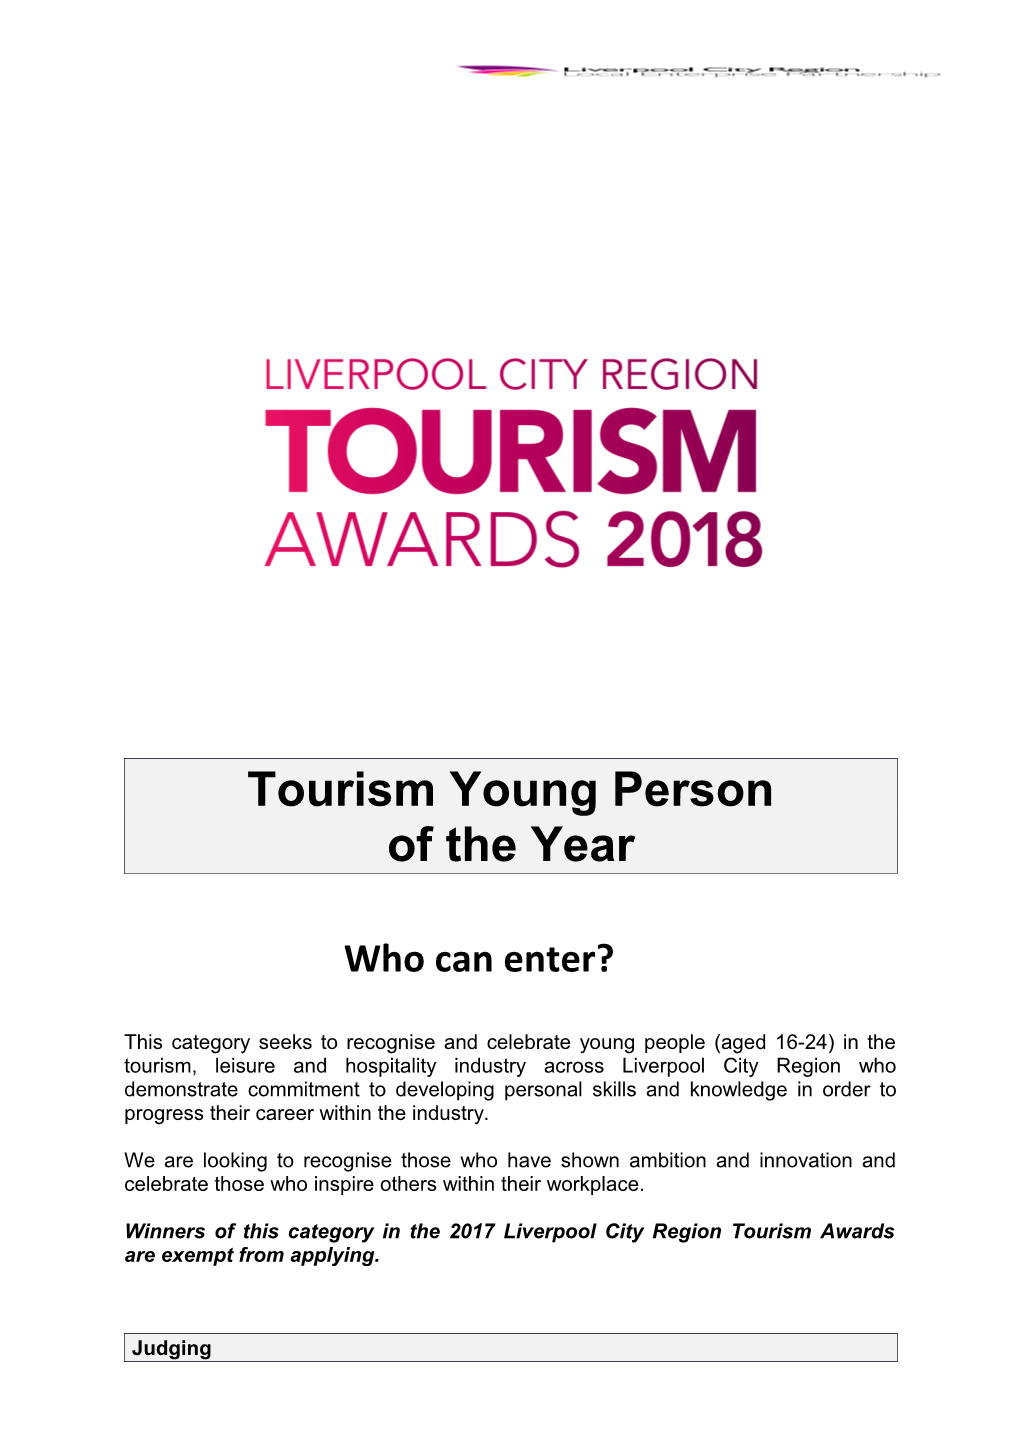 Tourism Young Person